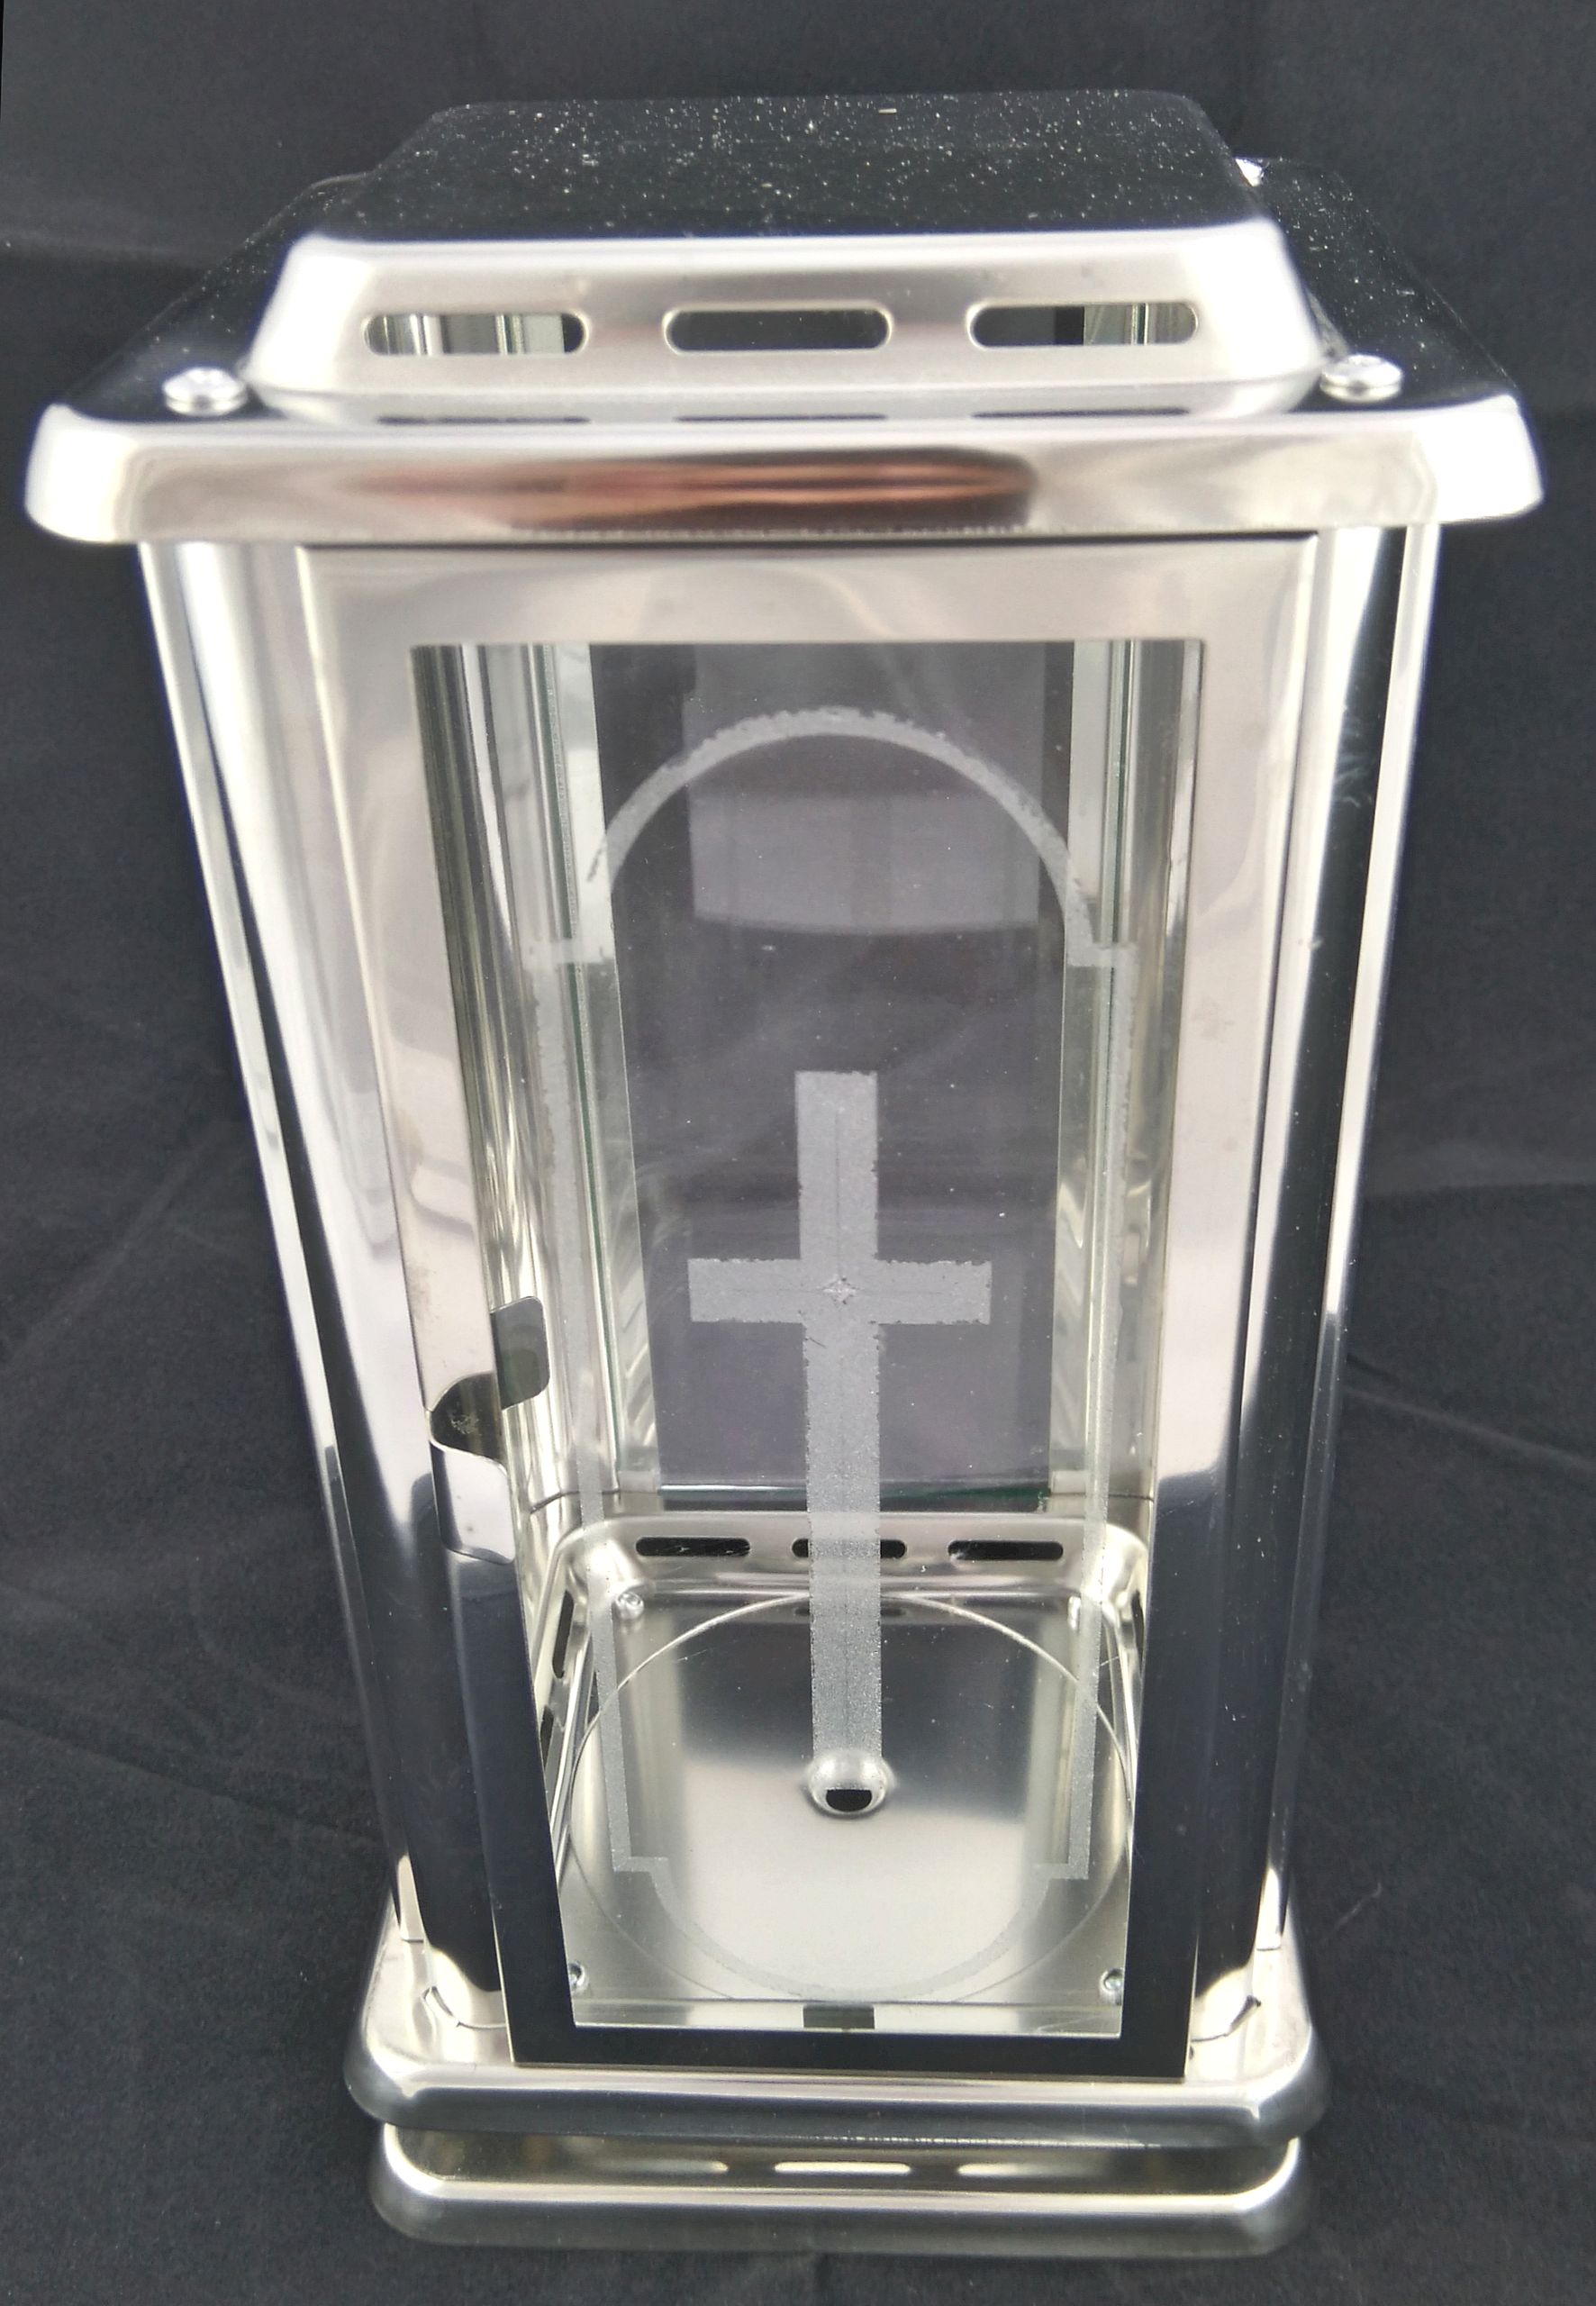 grave lamp "Royal" from stainless steel with cross